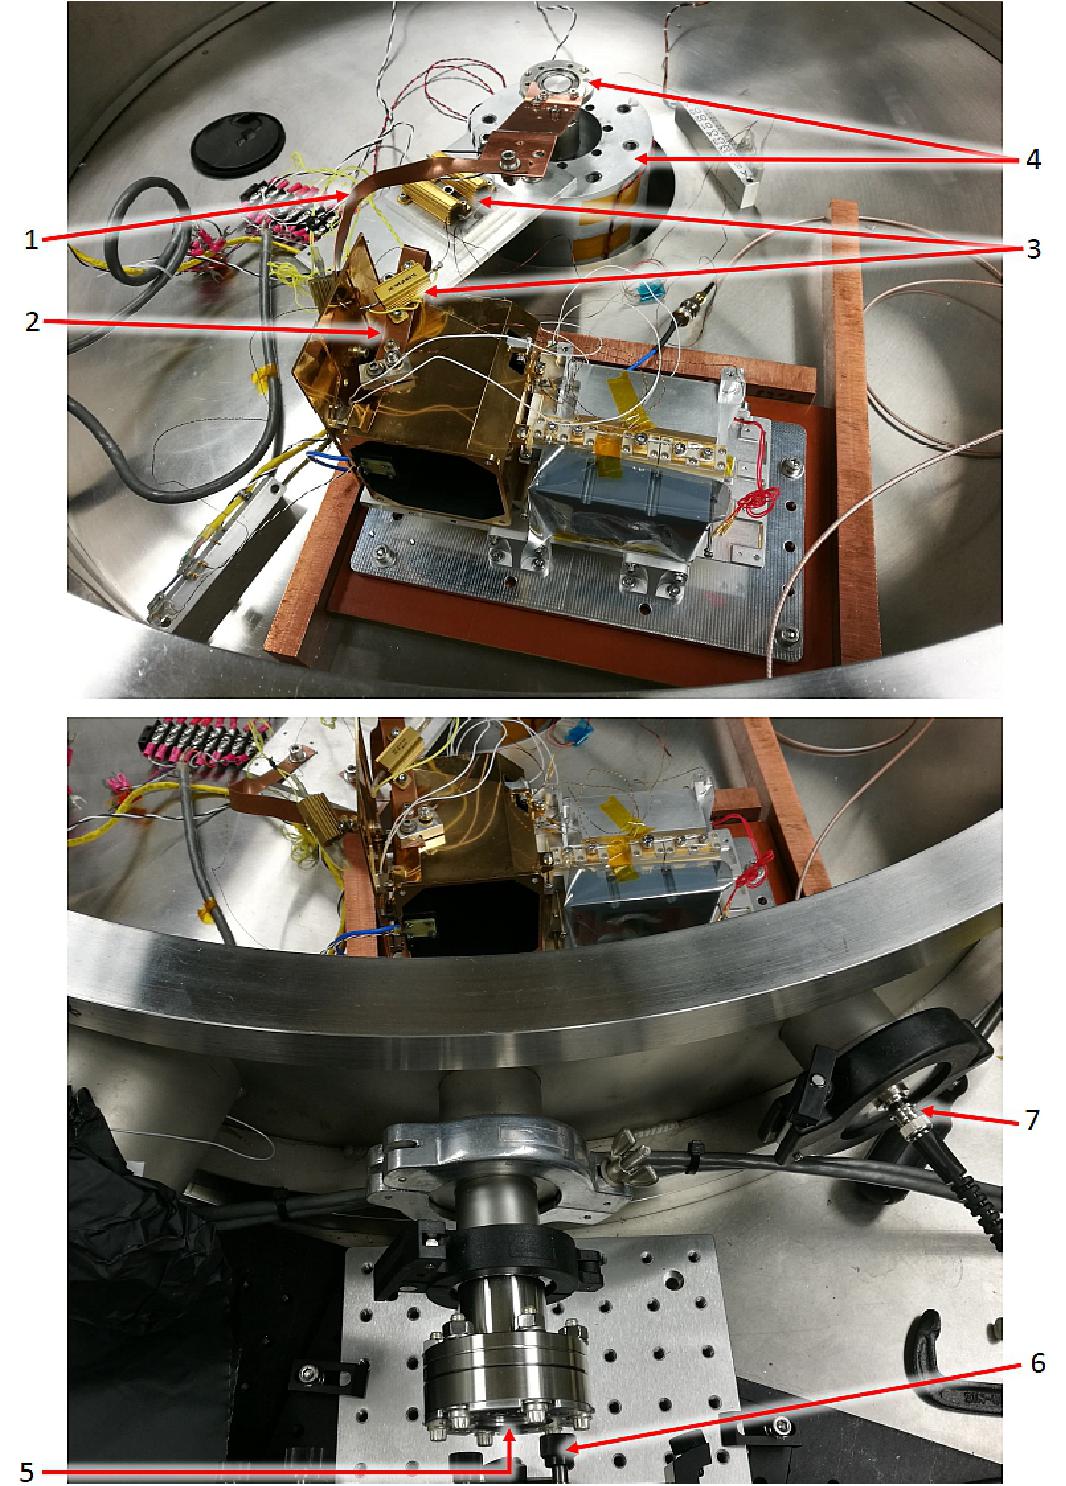 Figure 19: LF reflectometer optomechanical assembly in the vacuum chamber. 1: thermal strap mounted on the cryoradiator to control the temperature of the science detector; 2: thermal strap mounted on the receiver housing to control the temperature of the receiver mirror; 3: electrical heaters; 4: cold points inside the vacuum chamber; 5: optical window; 6: kinematic mount of the reflective collimator; 7: vacuum chamber feedthrough to connect the science detector to the femtoammeter (image credit: LF collaboration)